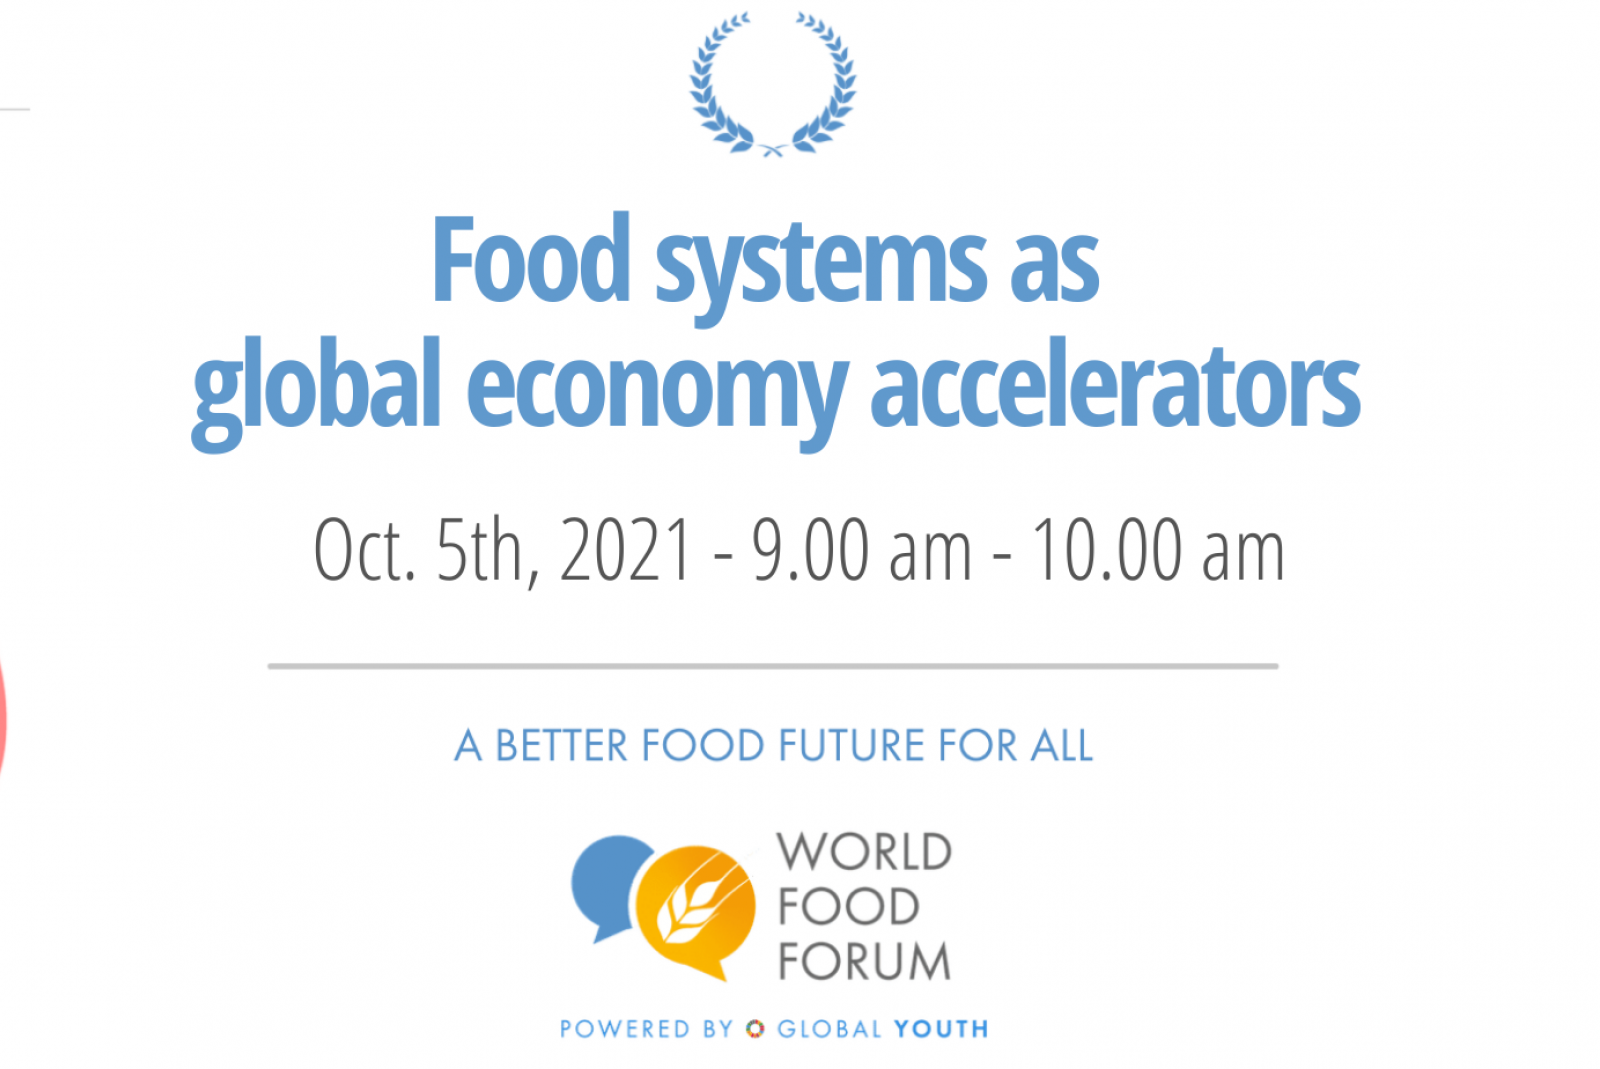 Food systems as global economy accelerators